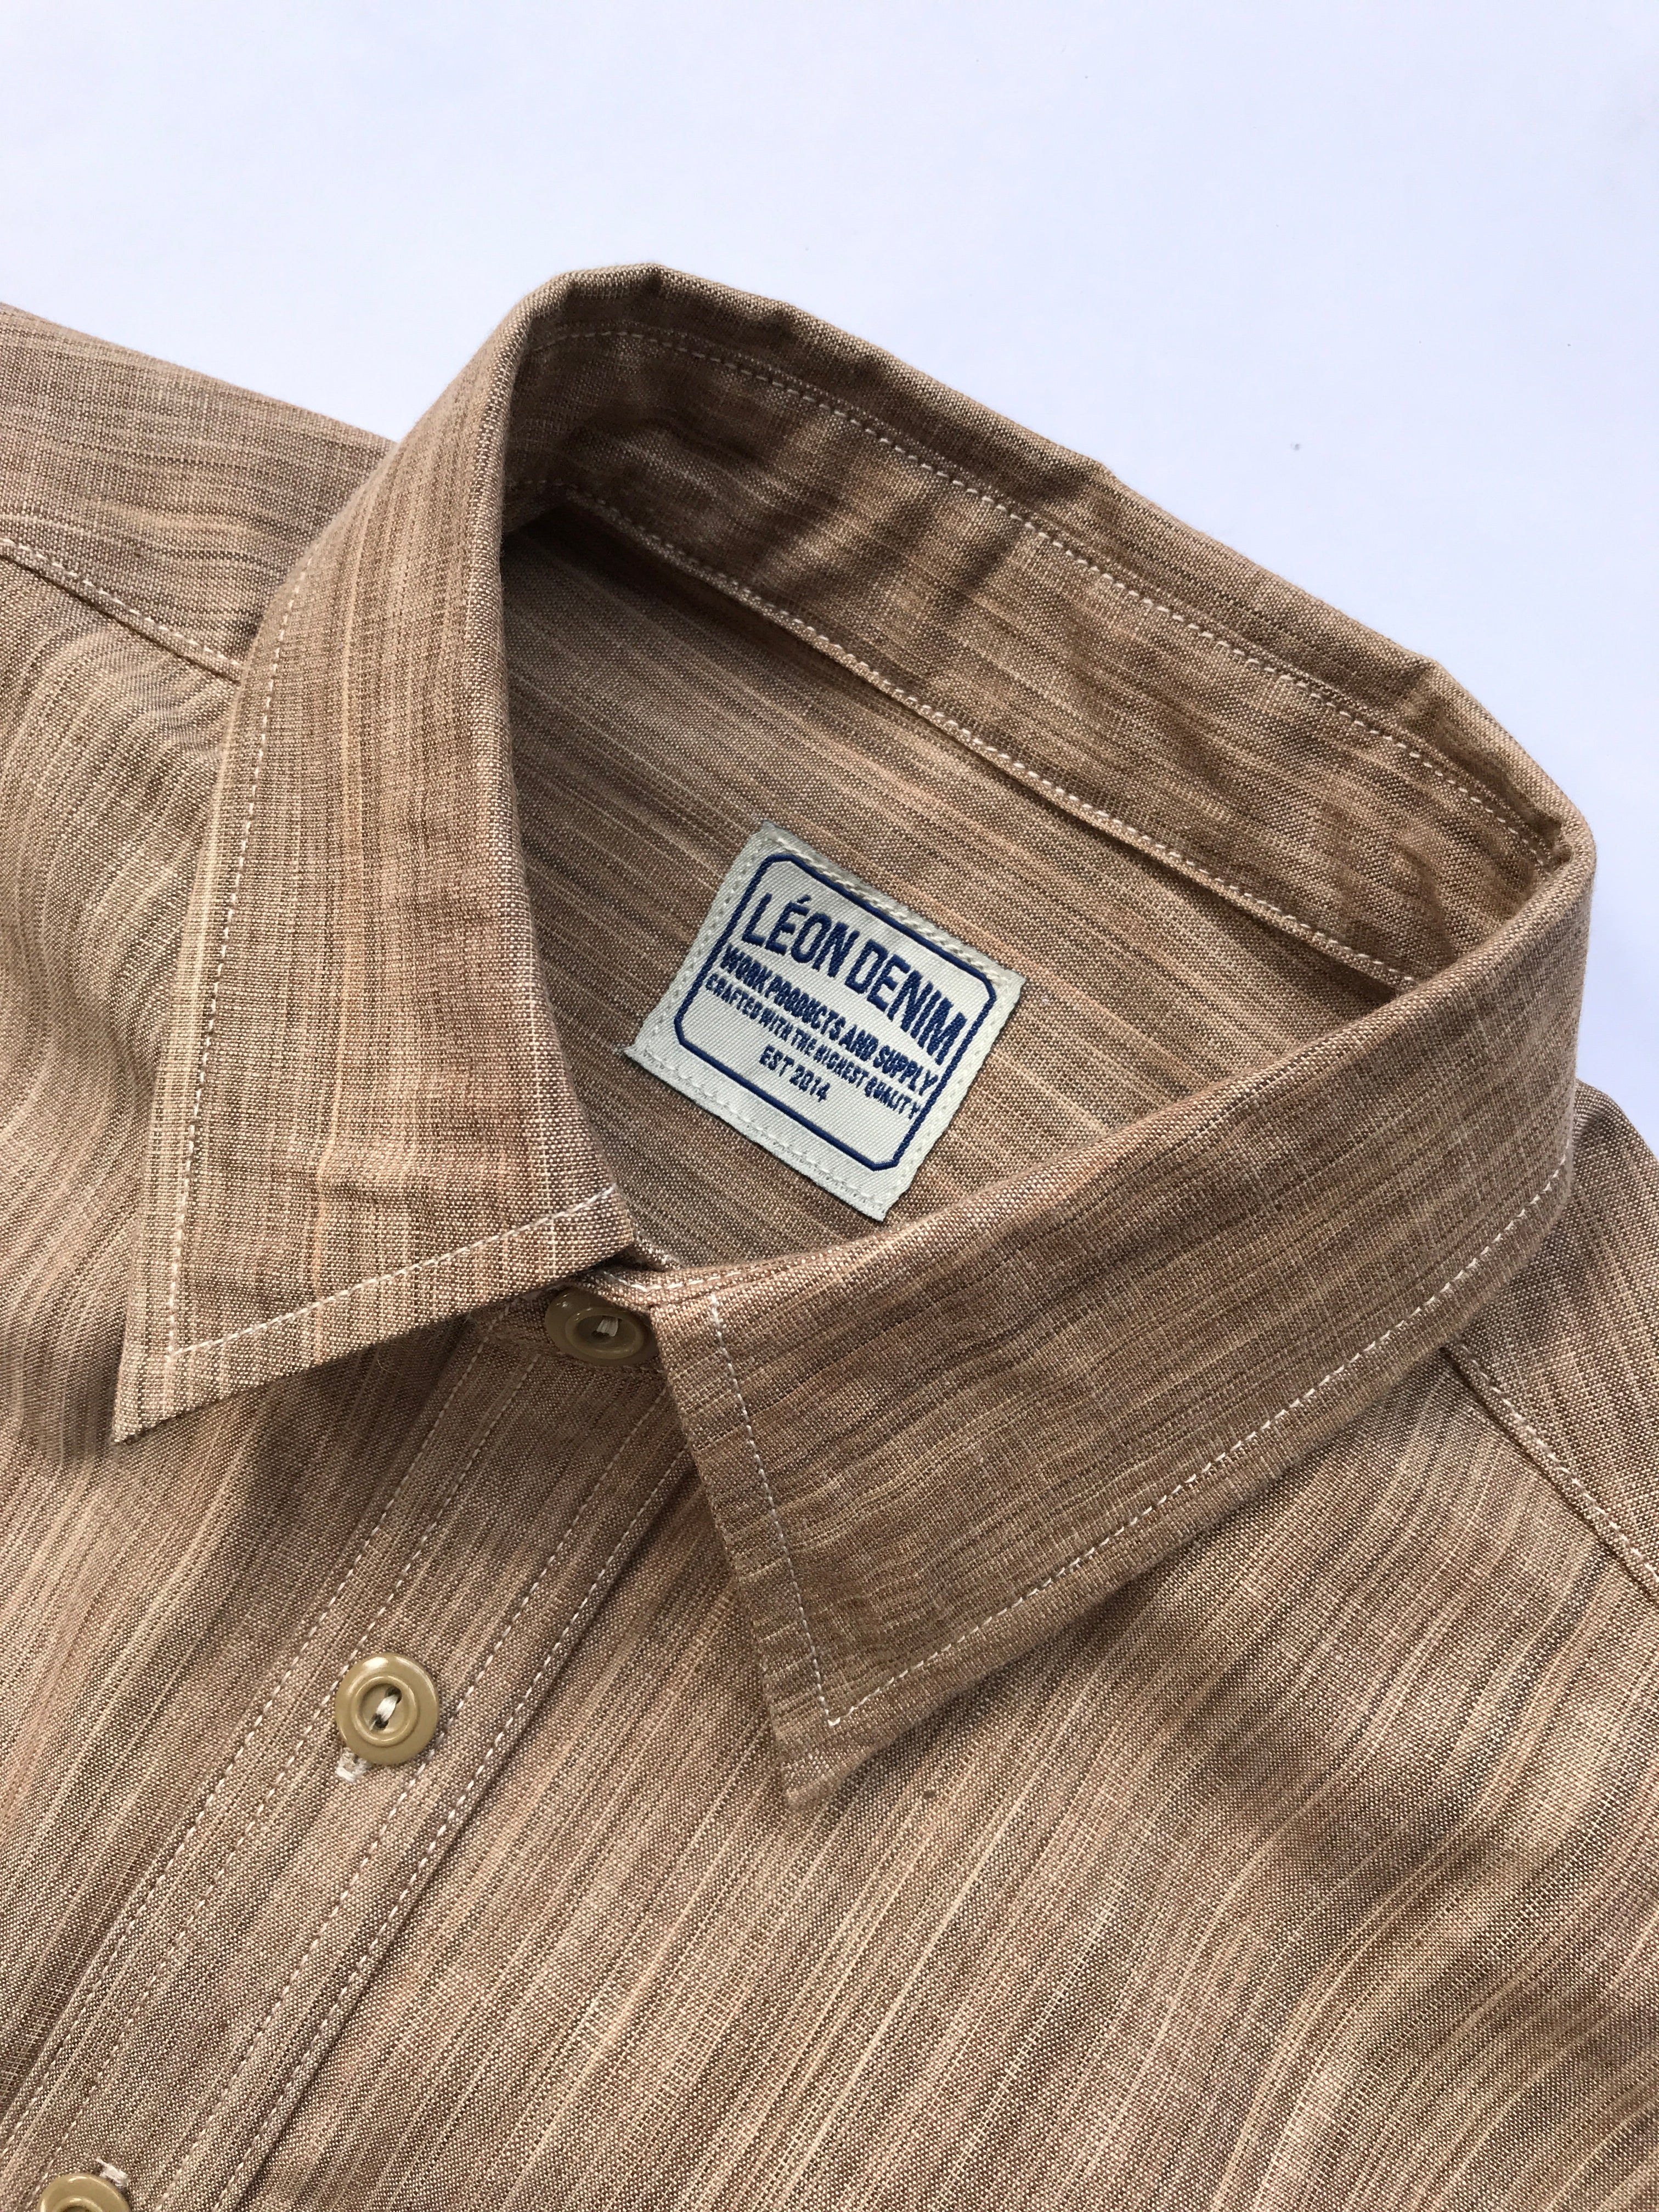 LD Commuter Pocket Shirt in 5 oz. Persimmon Selvedge Chambray